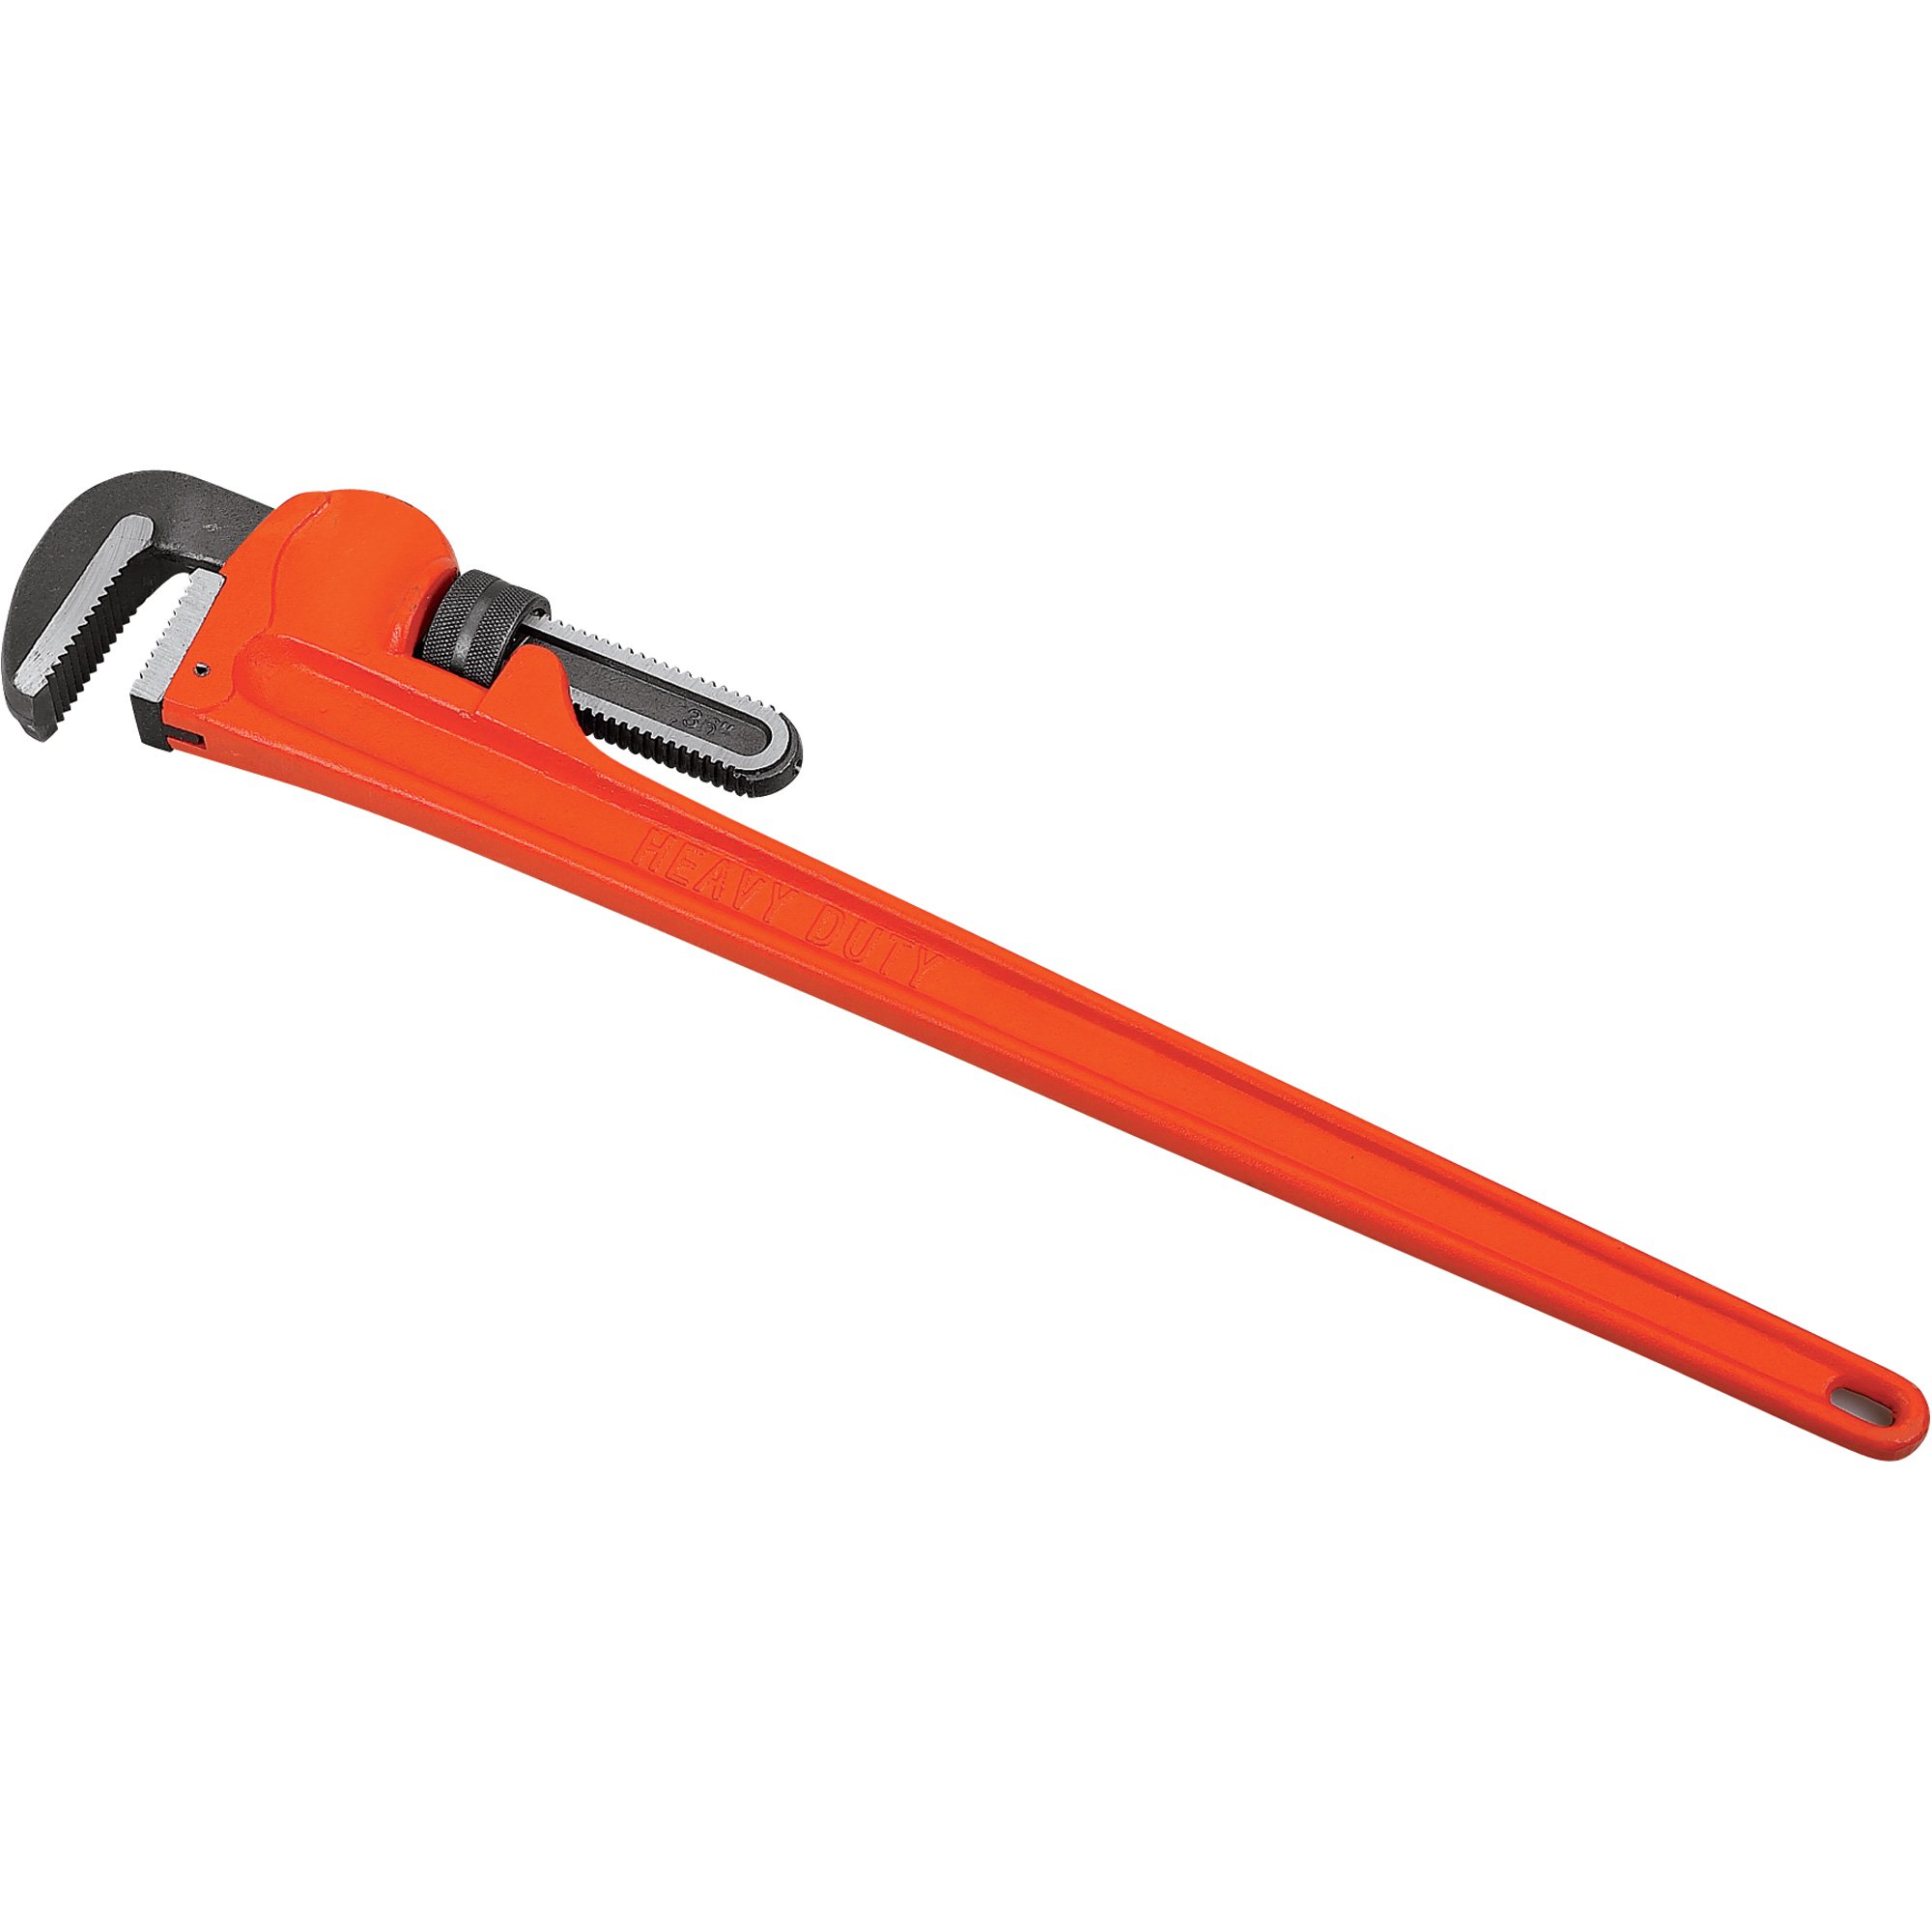 Pipe wrench photo